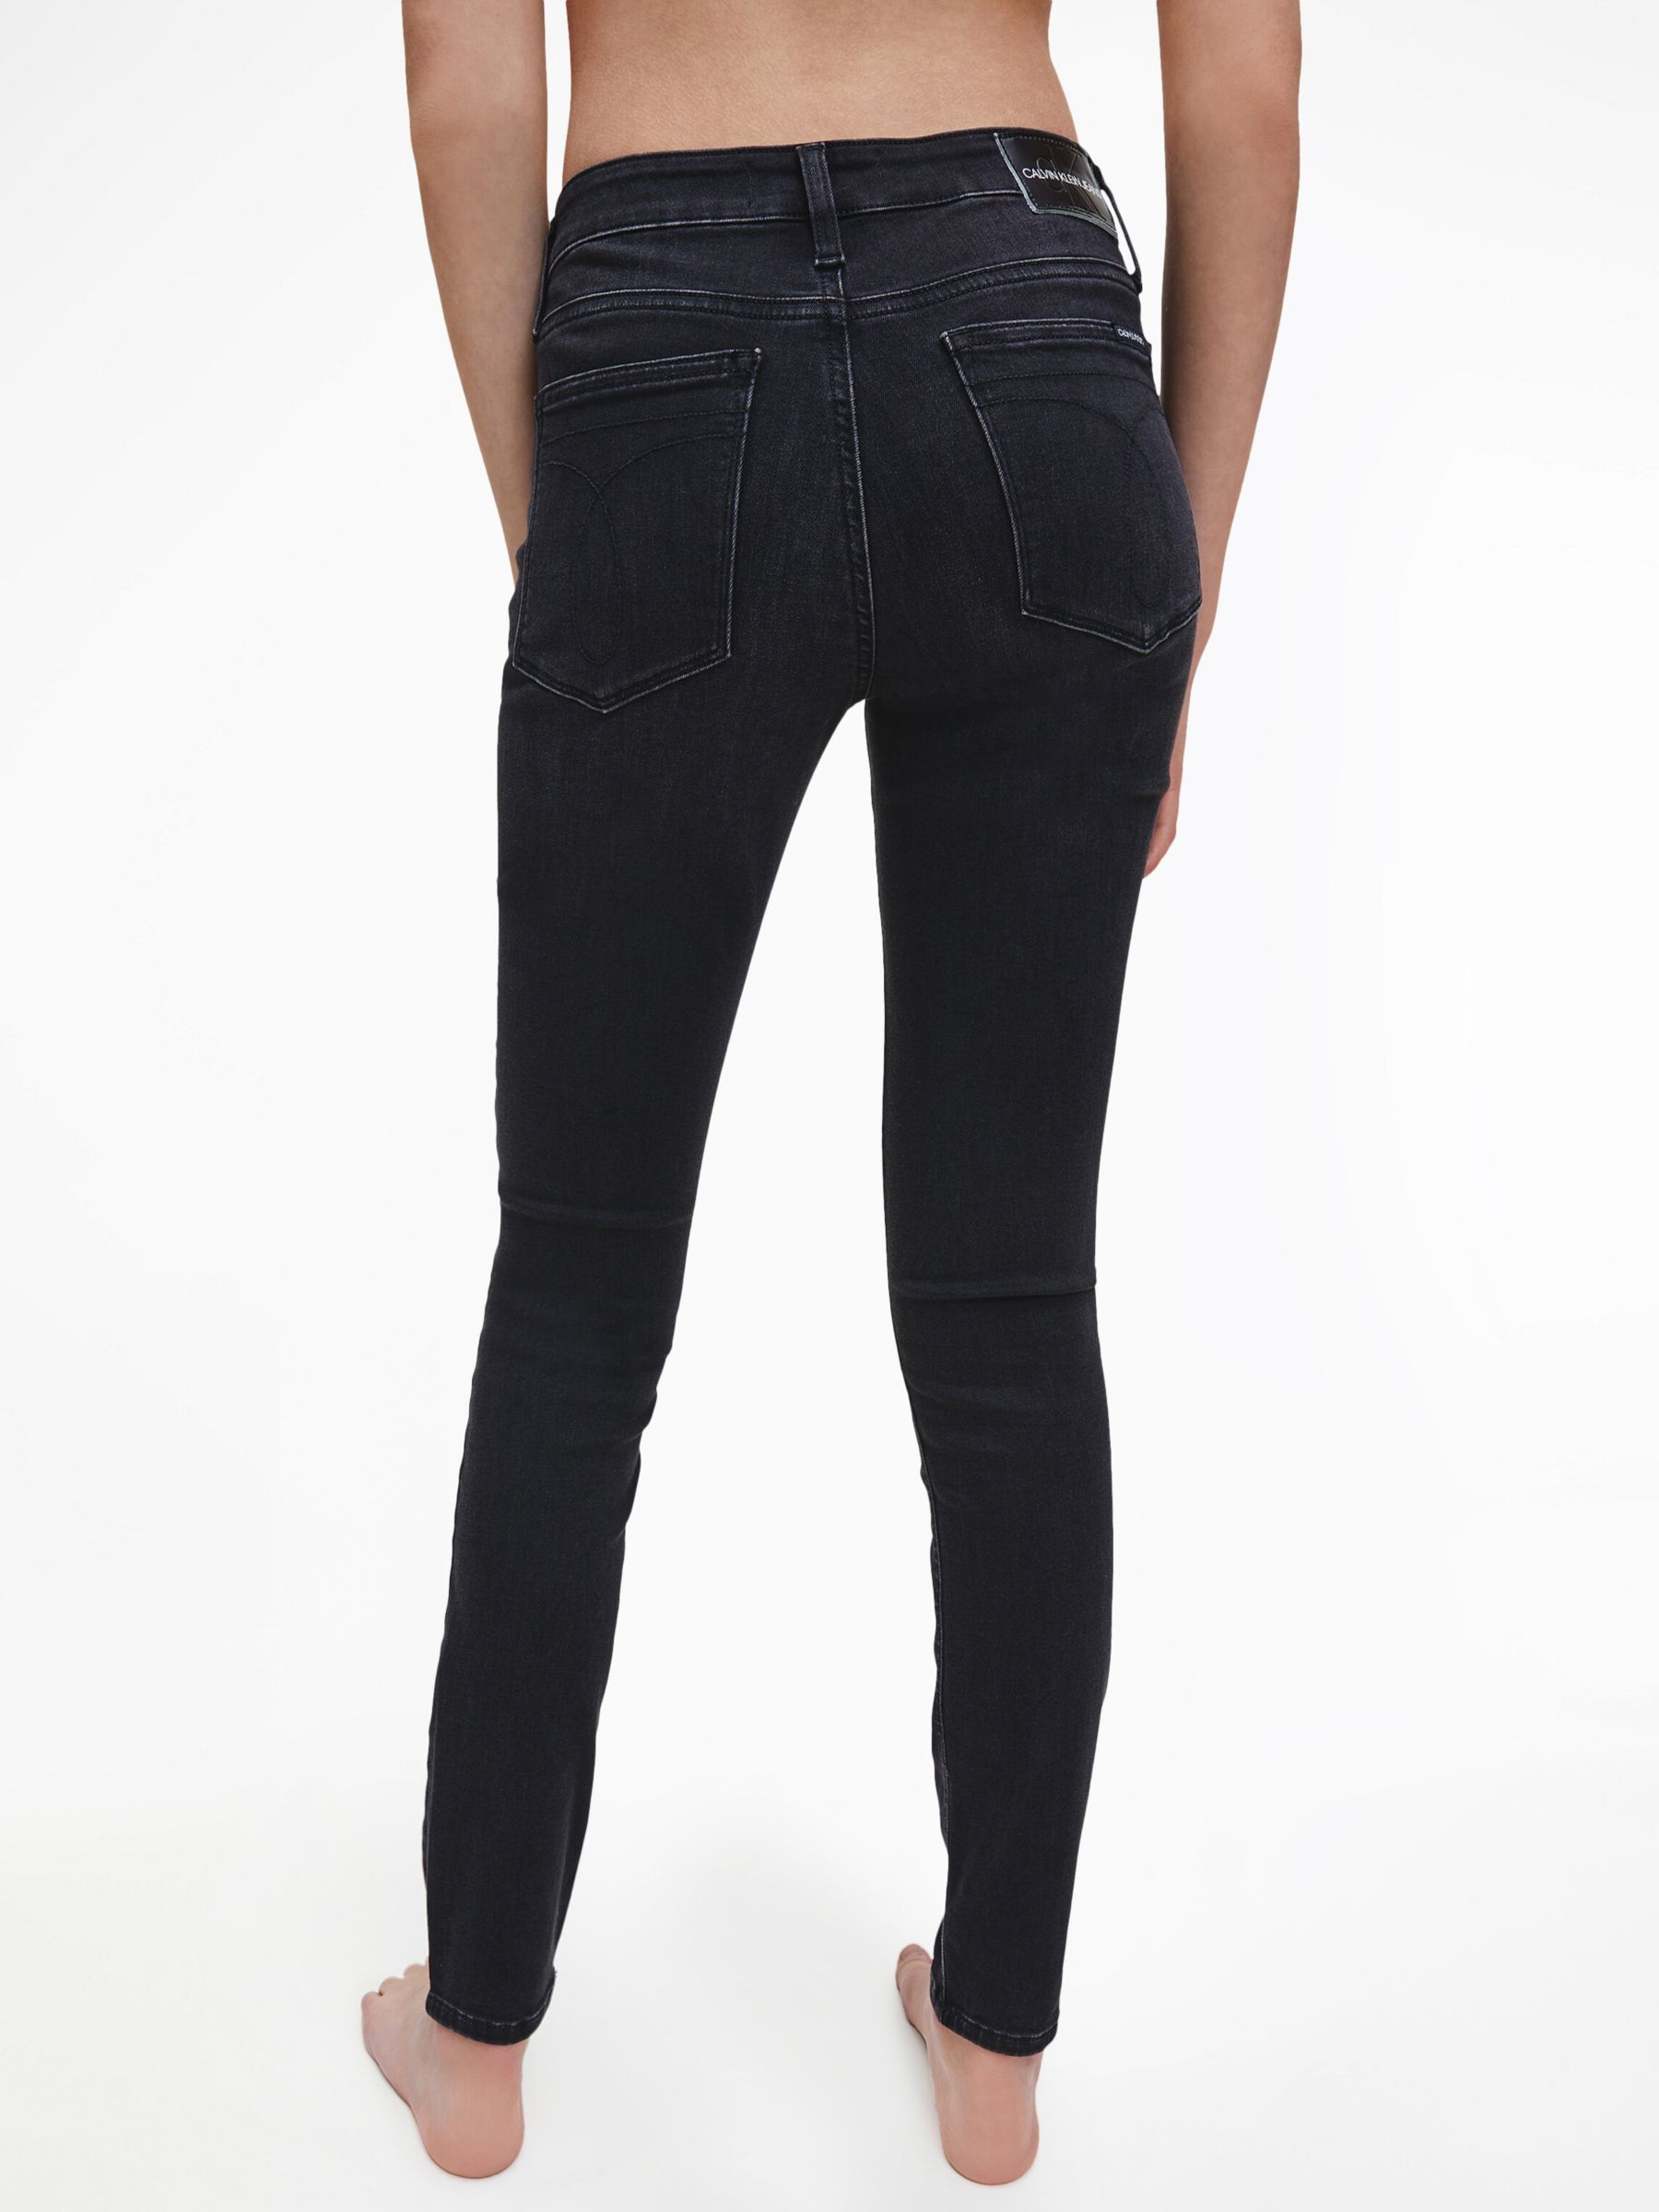 Calvin Klein Mid Rise Skinny Jeans, Washed Black at John Lewis & Partners